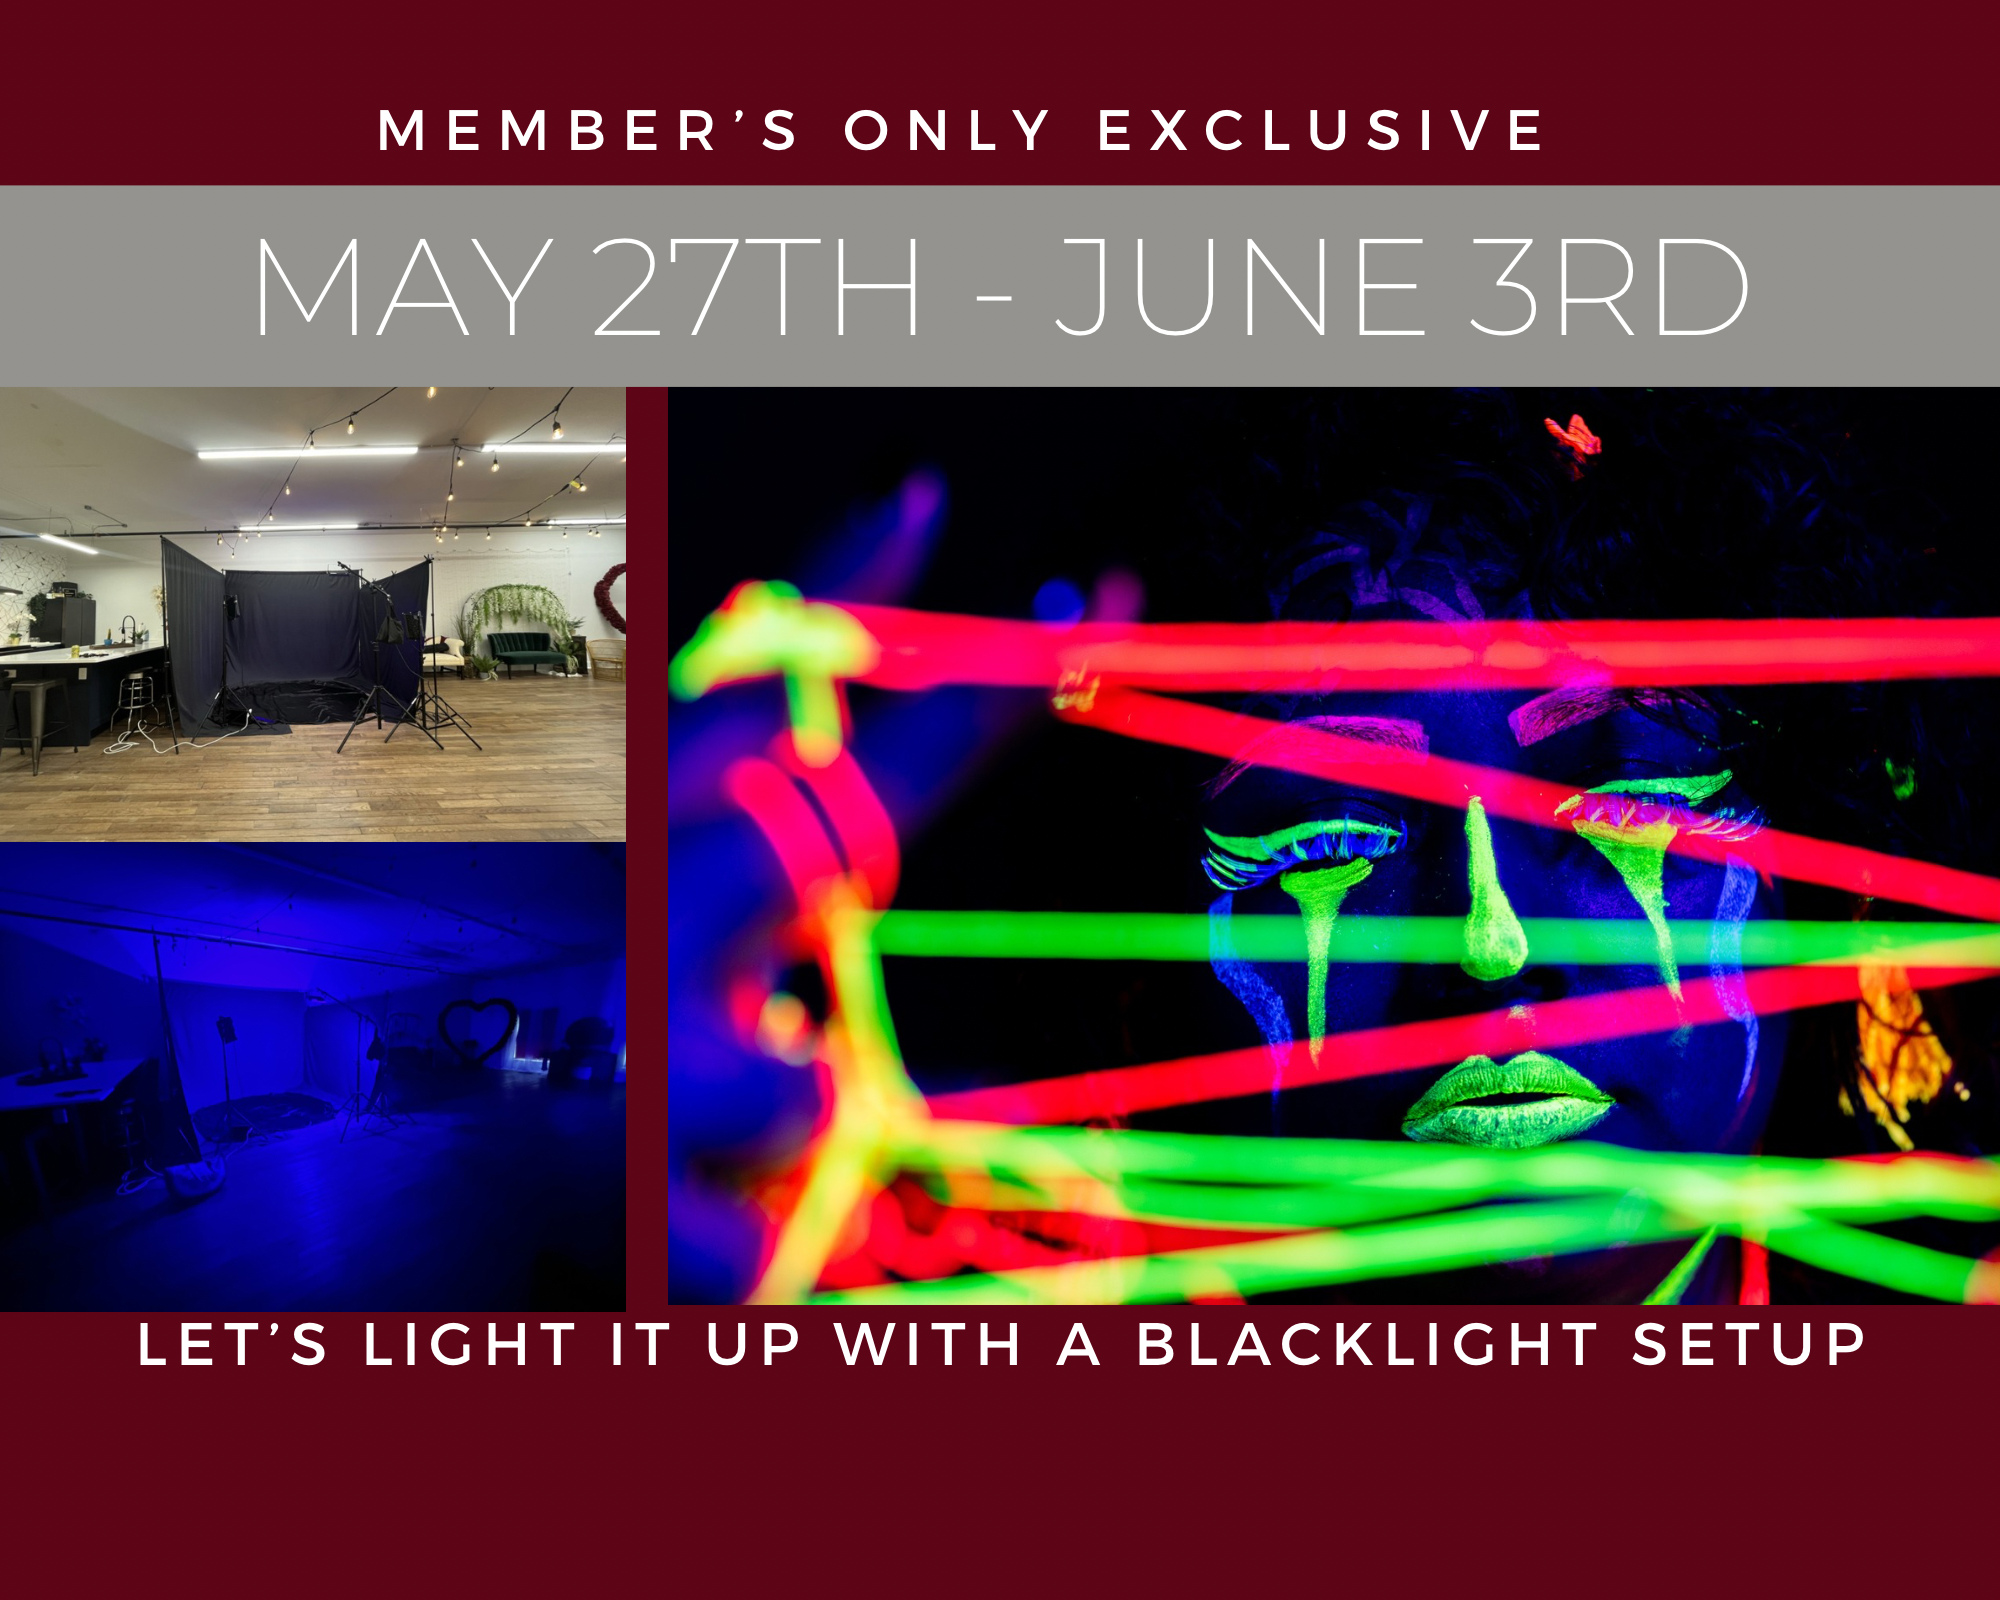 Blacklight will be available at the studio May 27- June 3rd www.mistudiospace.com